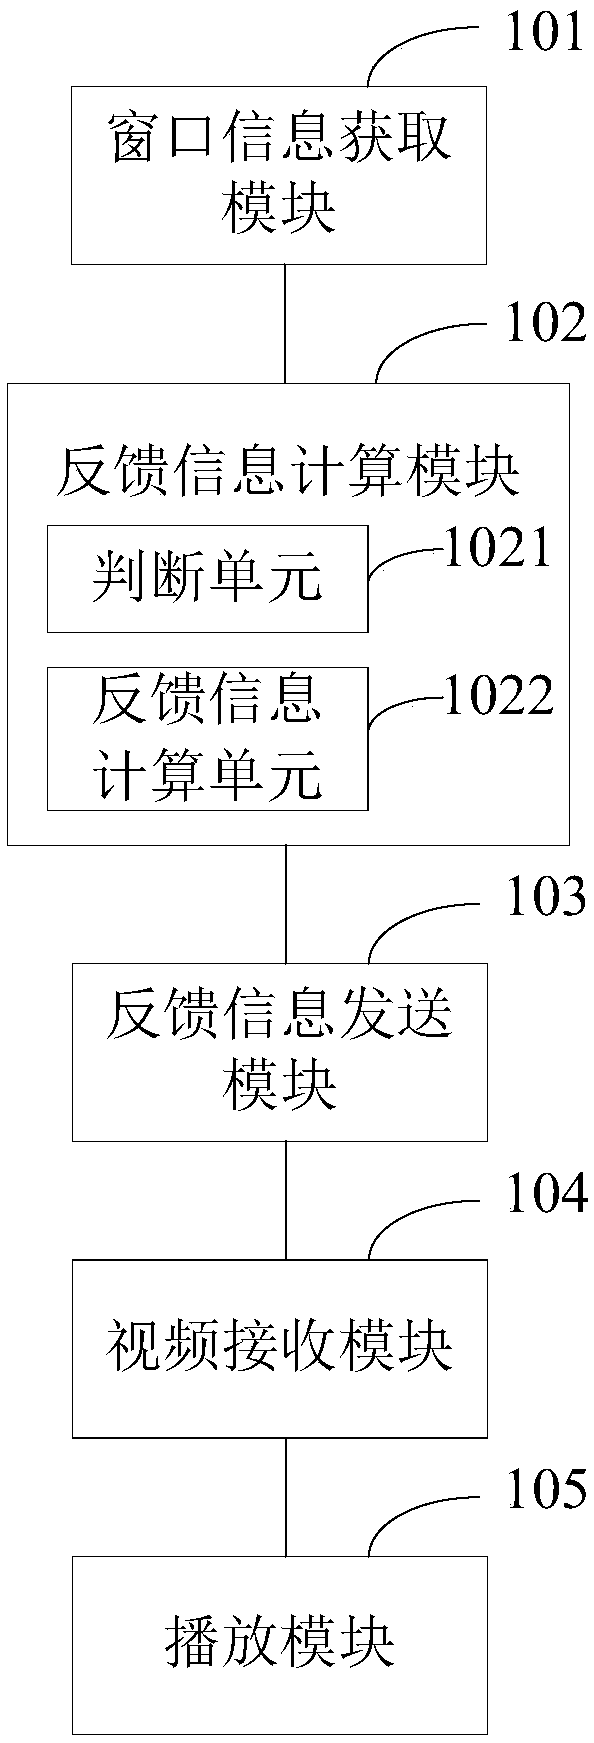 Video transmission system and receiving/sending/transmission methods and devices